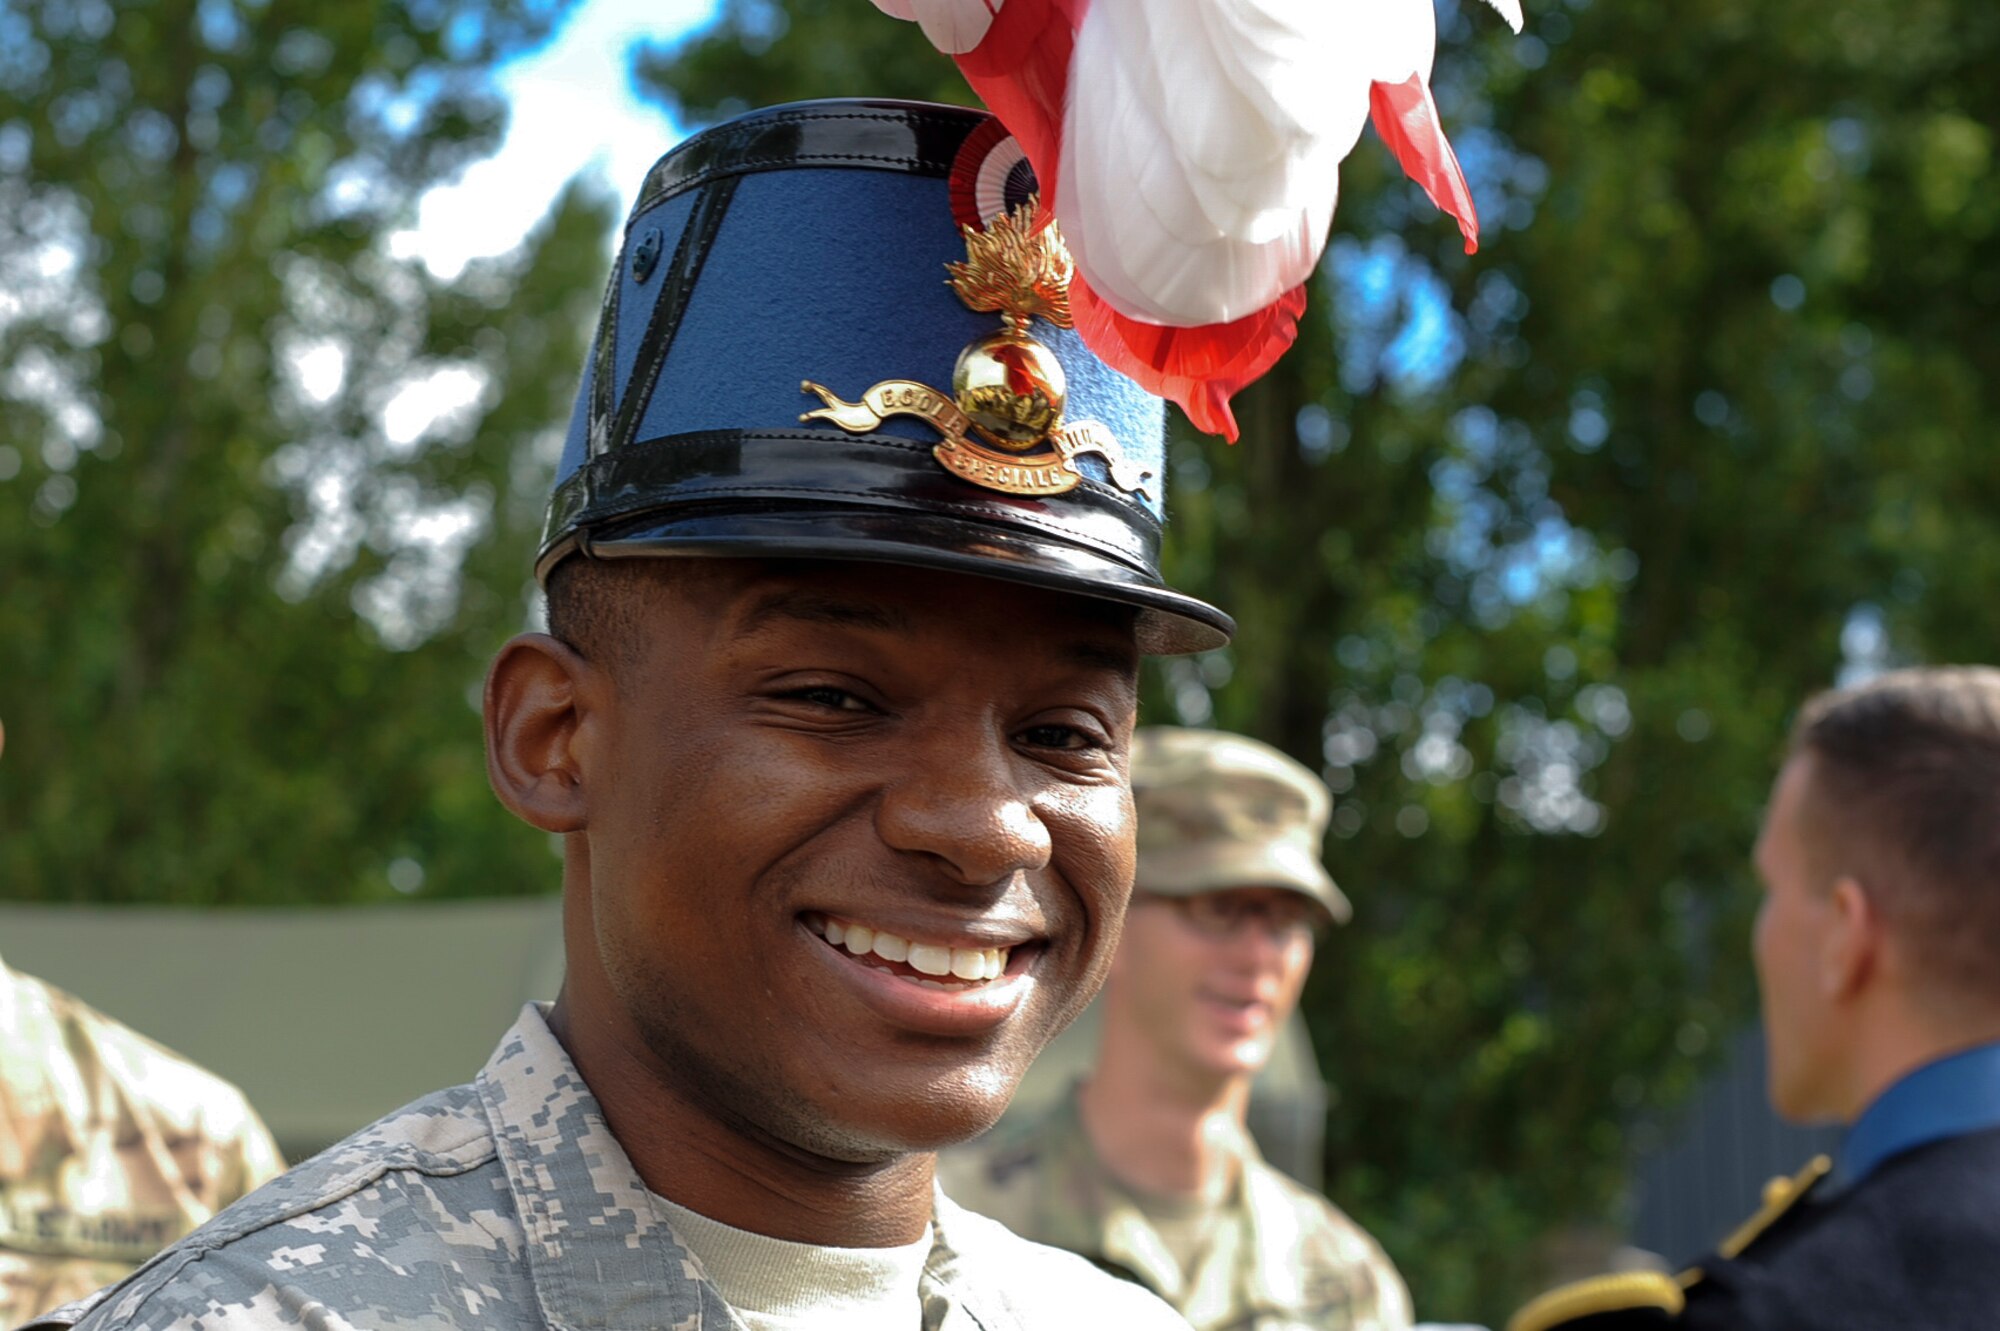 A U.S. Army soldier tries on an Armée de Terre member’s headgear at Camp de Satory, France, July 12, 2017. U.S. military members arrived at Lycee Militaire de Saint-Cyr and stayed for over a week to participate in and prepare for France’s Bastille Day military parade on July 14, 2017. (U.S. Air Force photo by Airman 1st Class Savannah L. Waters)